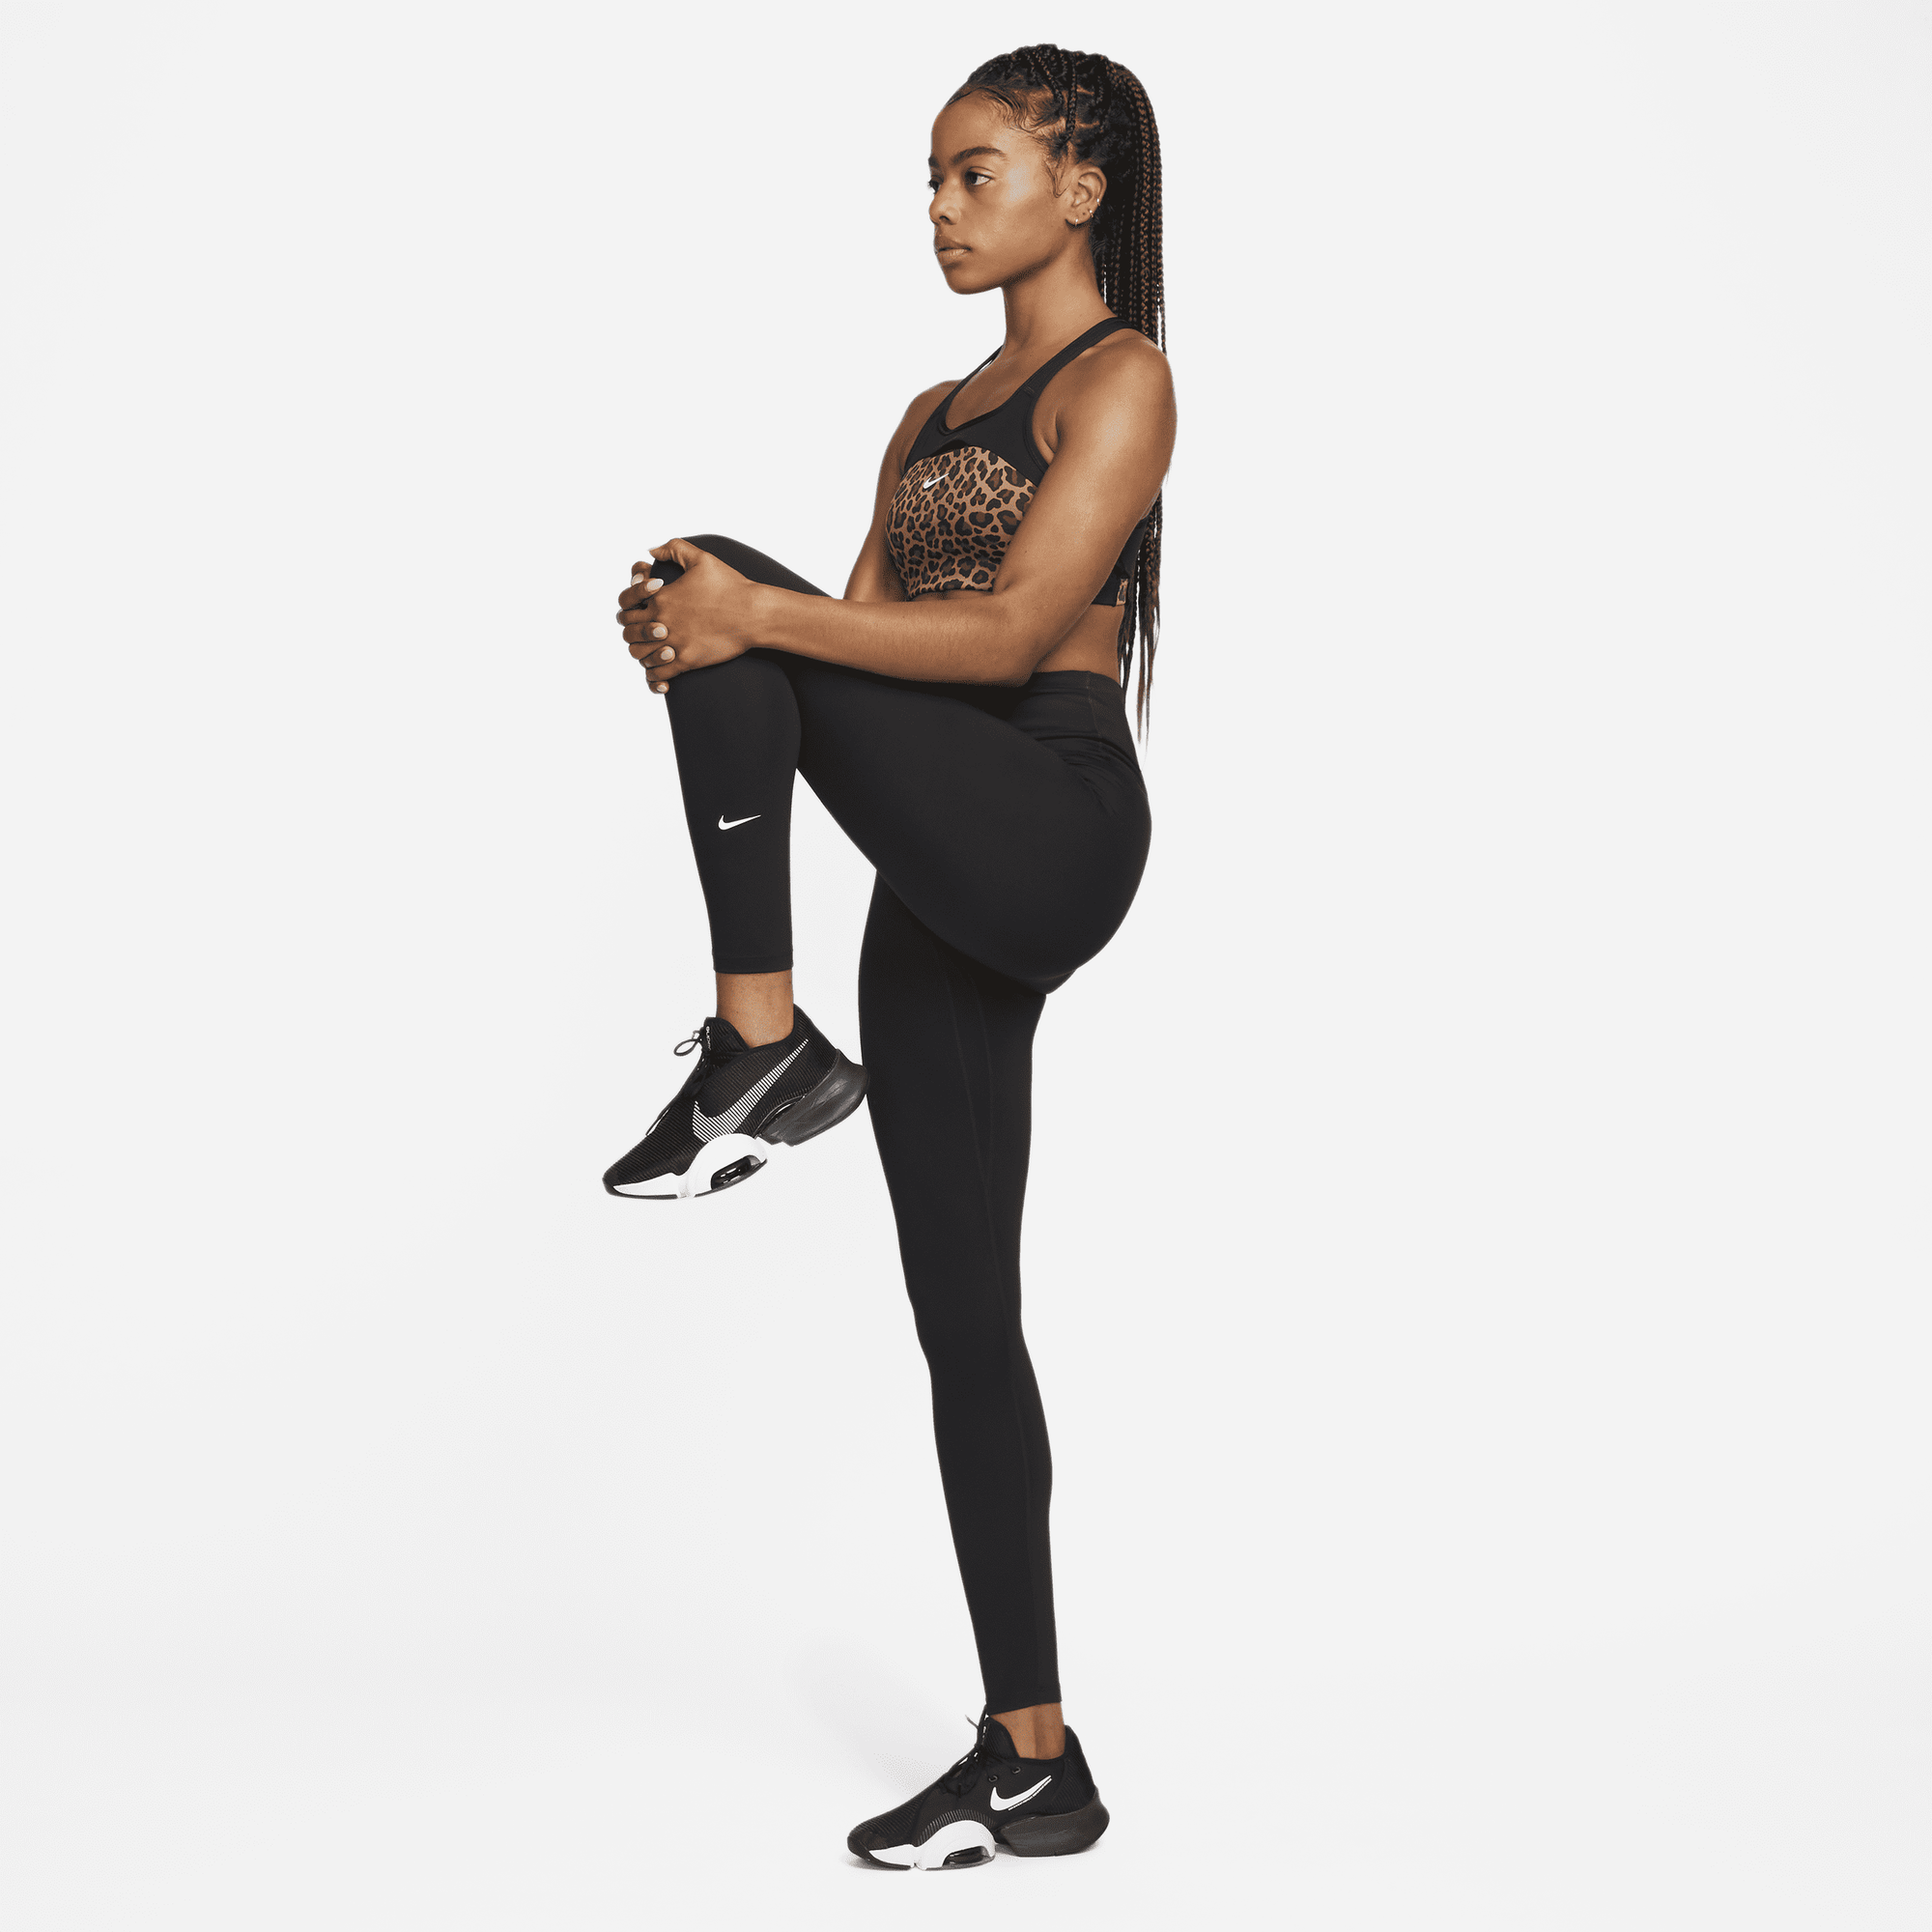 SteP MALL ONLINE SHOP / NIKE 2021 M NK CHLGR MOBILITY TIGHT